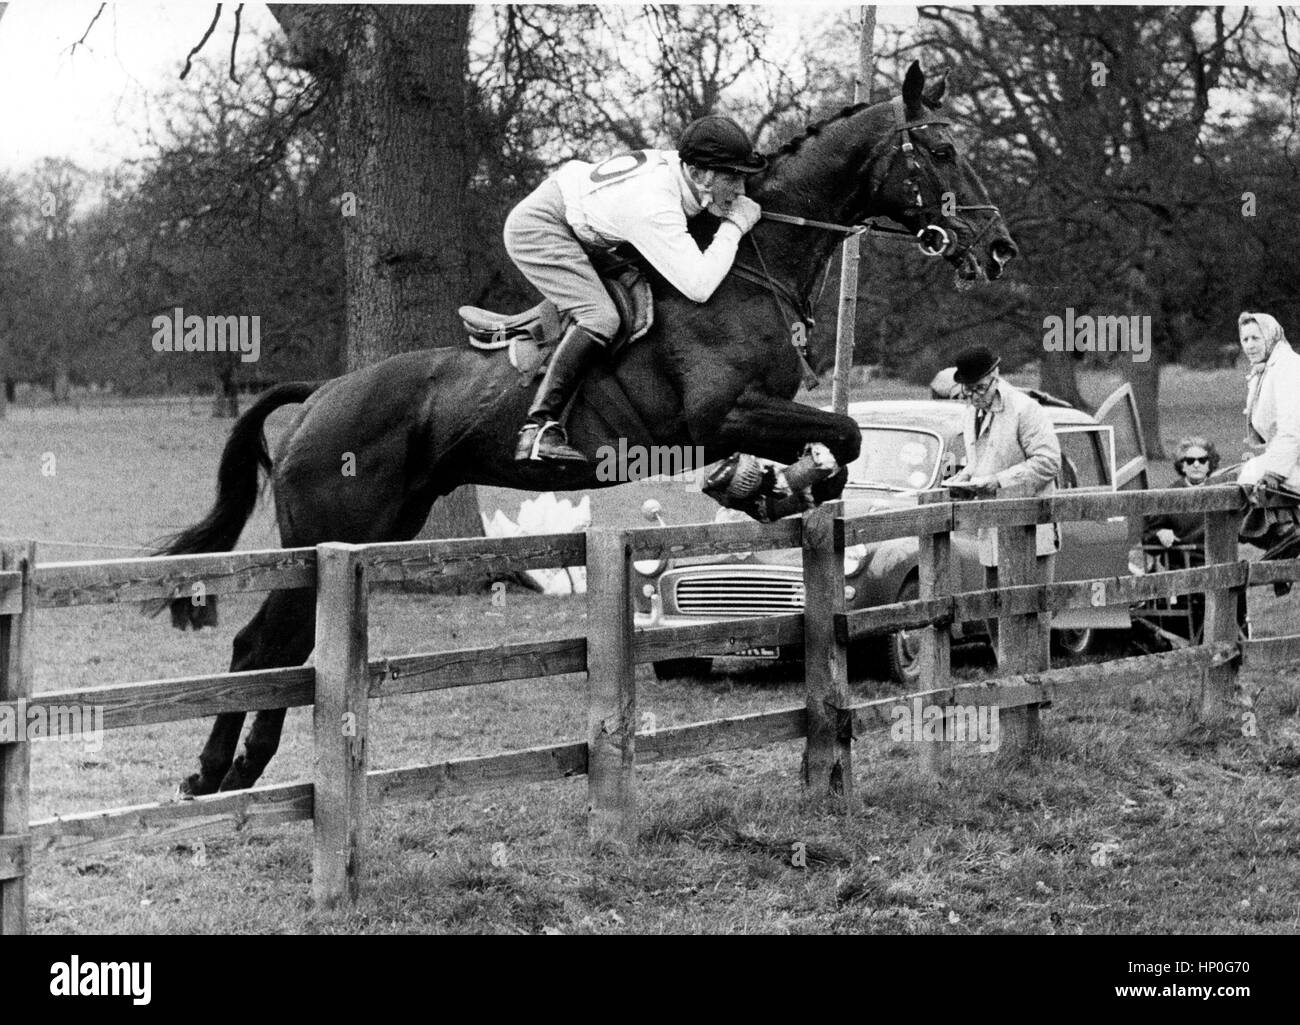 Jeremy Beale (GBR) riding SUNNY JIM at Badminton - © HorseSource/col.Poudret Stock Photo